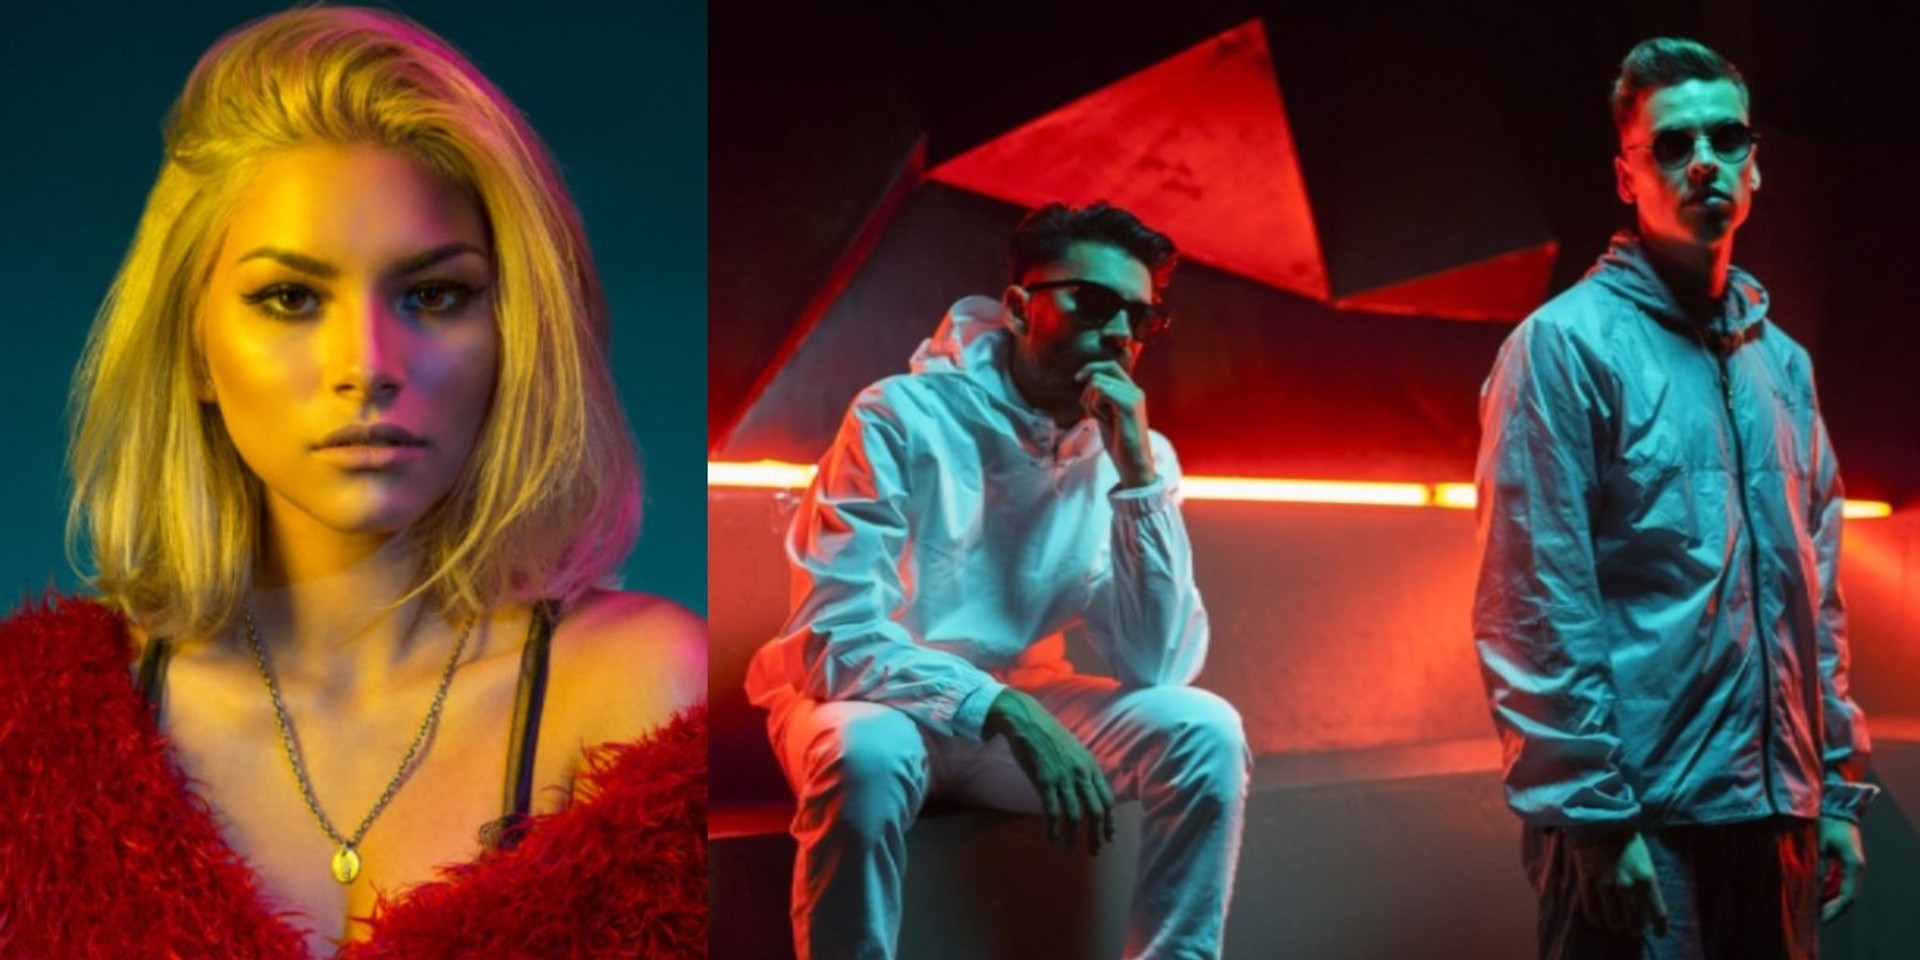 Tabitha Nauser enchants on new song with Yellow Claw, 'Crash This Party' – listen